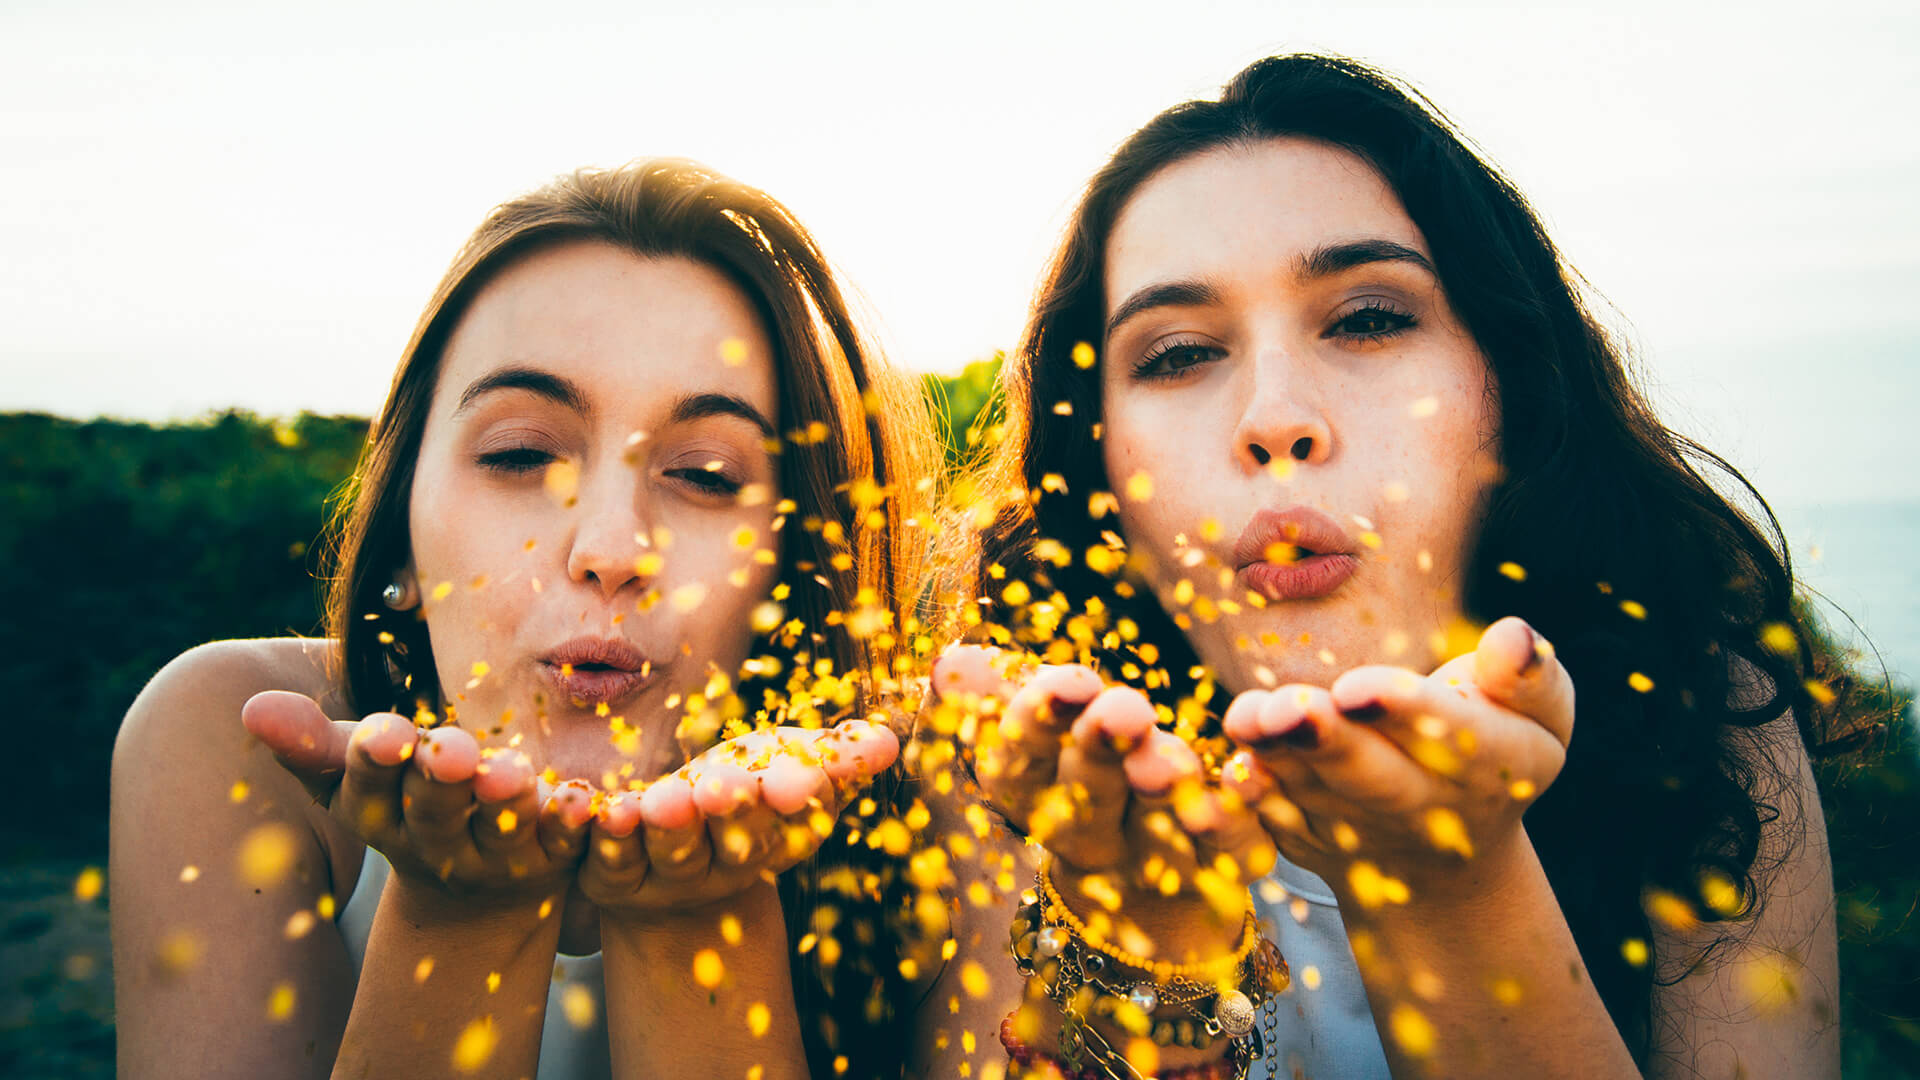 Two students in the countryside blowing glitter from their hands.